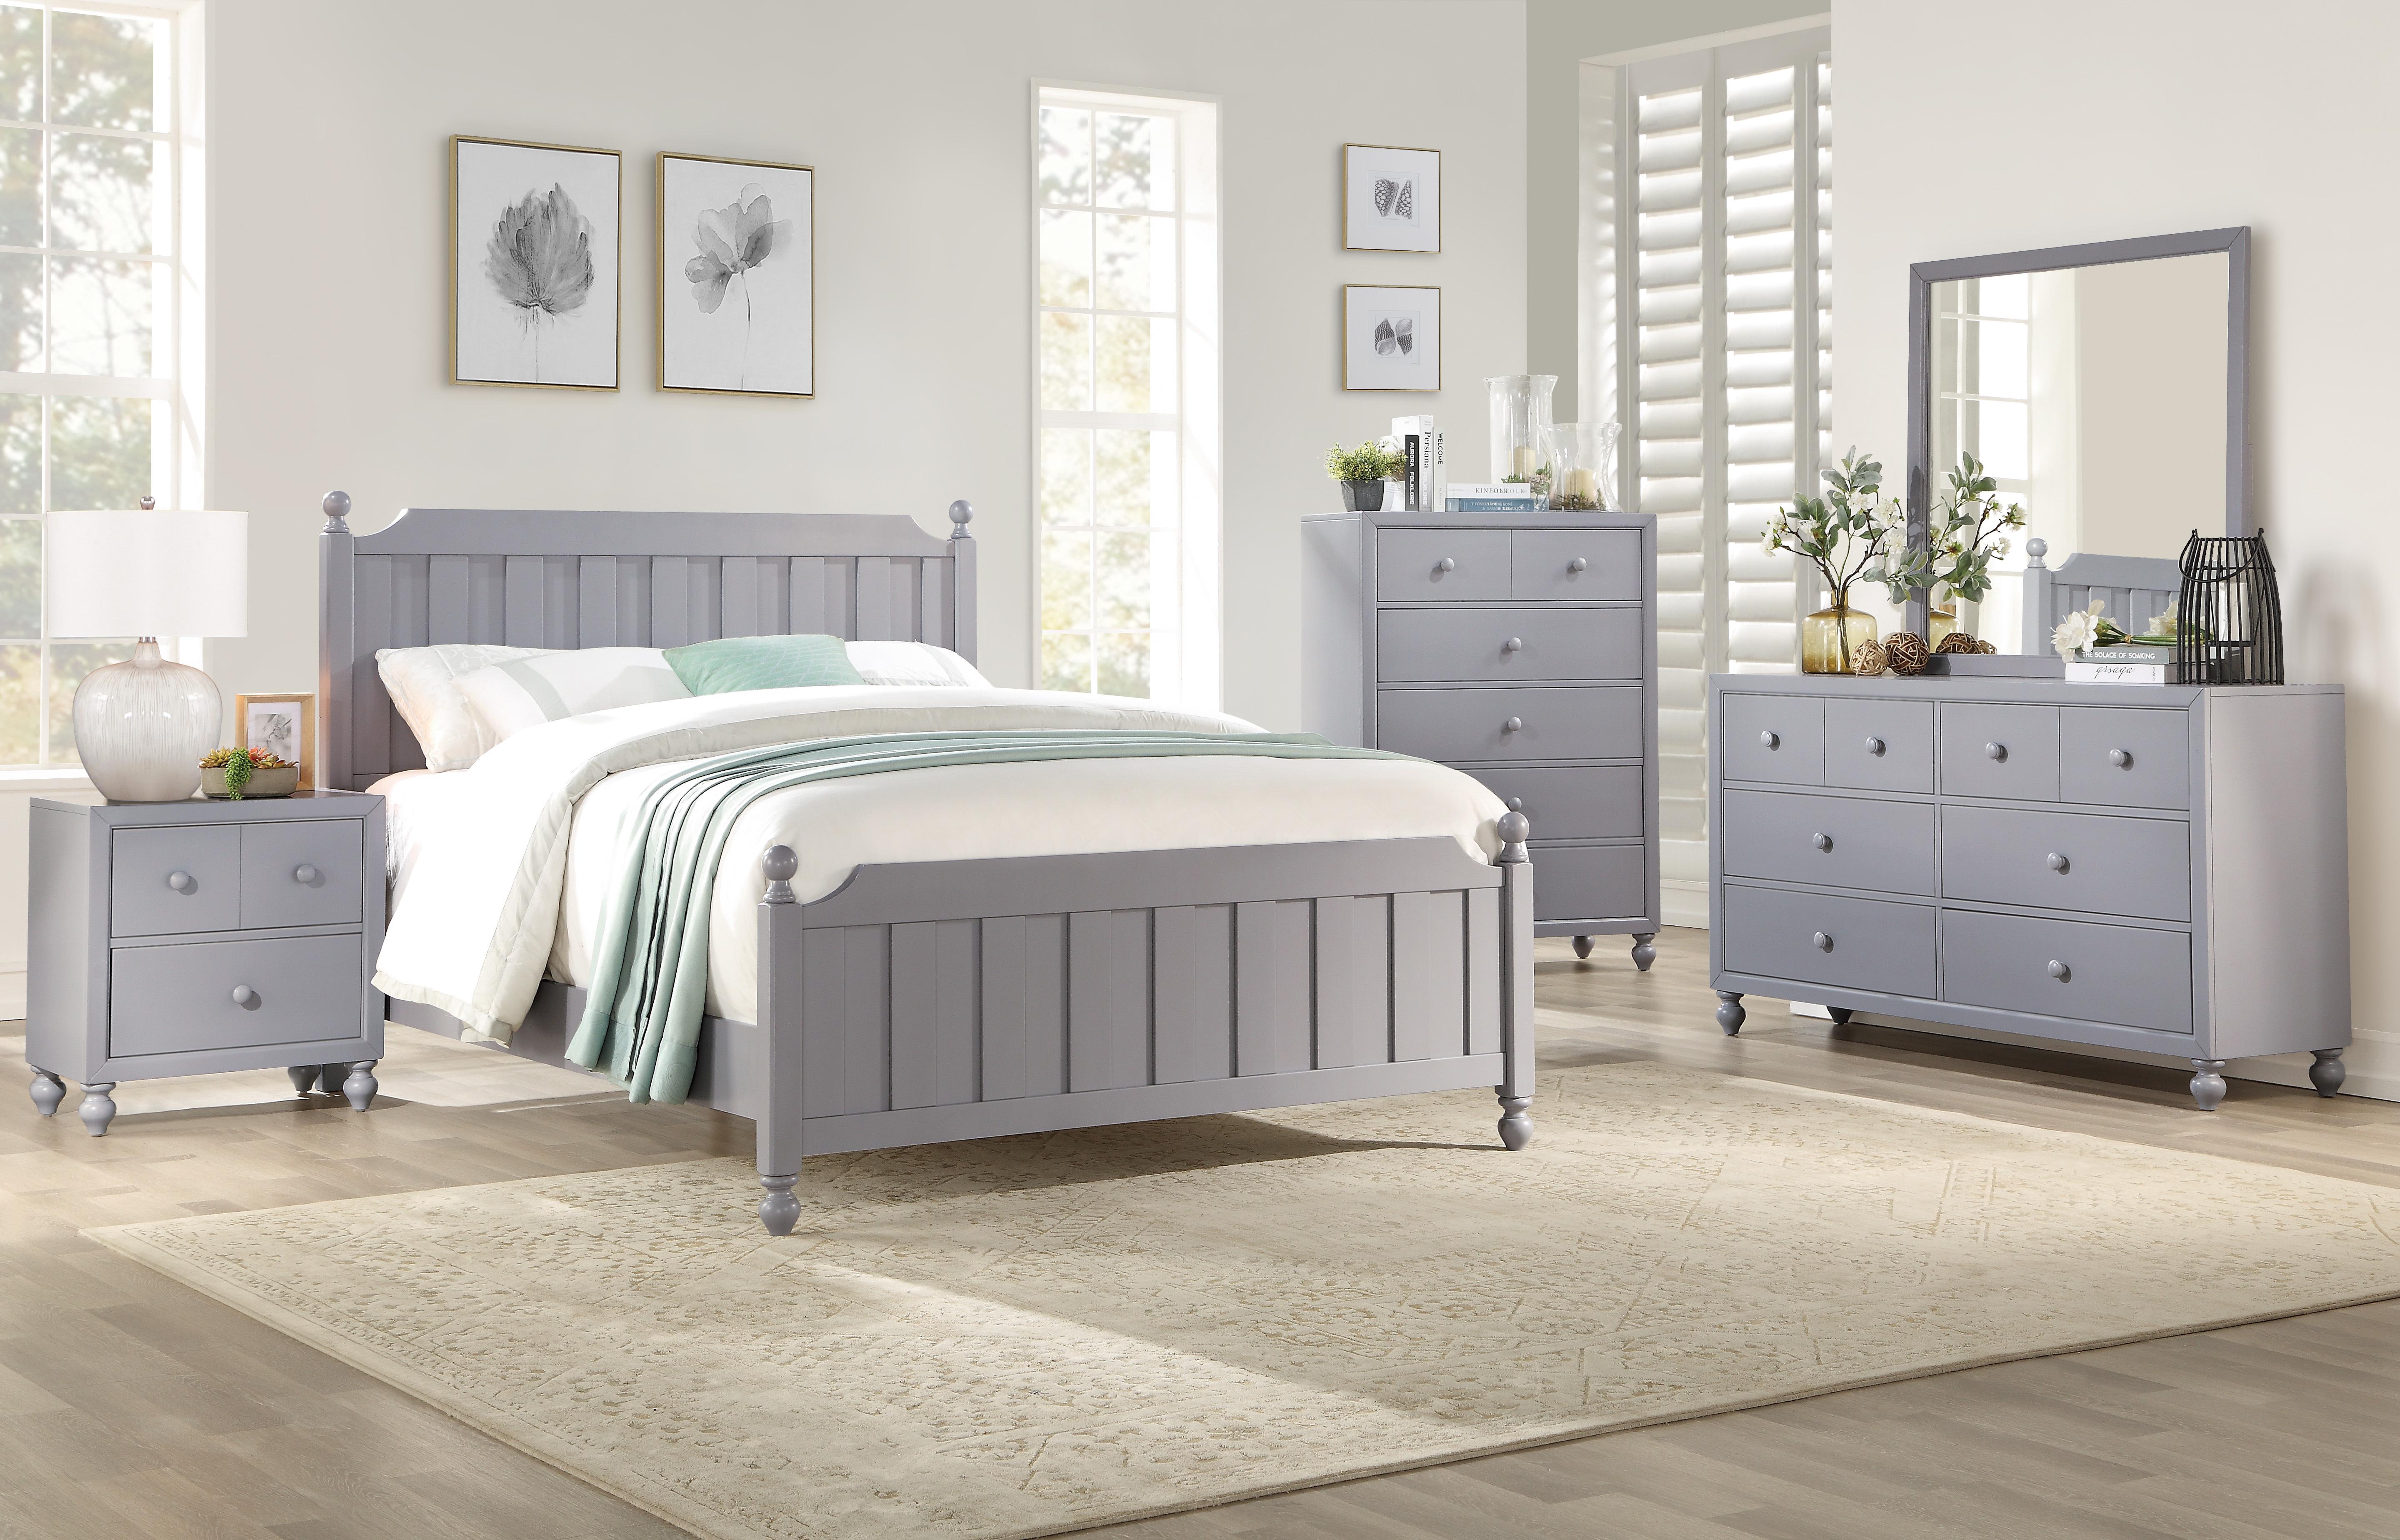 Modern Bedroom Set 1803GY-1-5PC Wellsummer 1803GY-1-5PC in Gray 